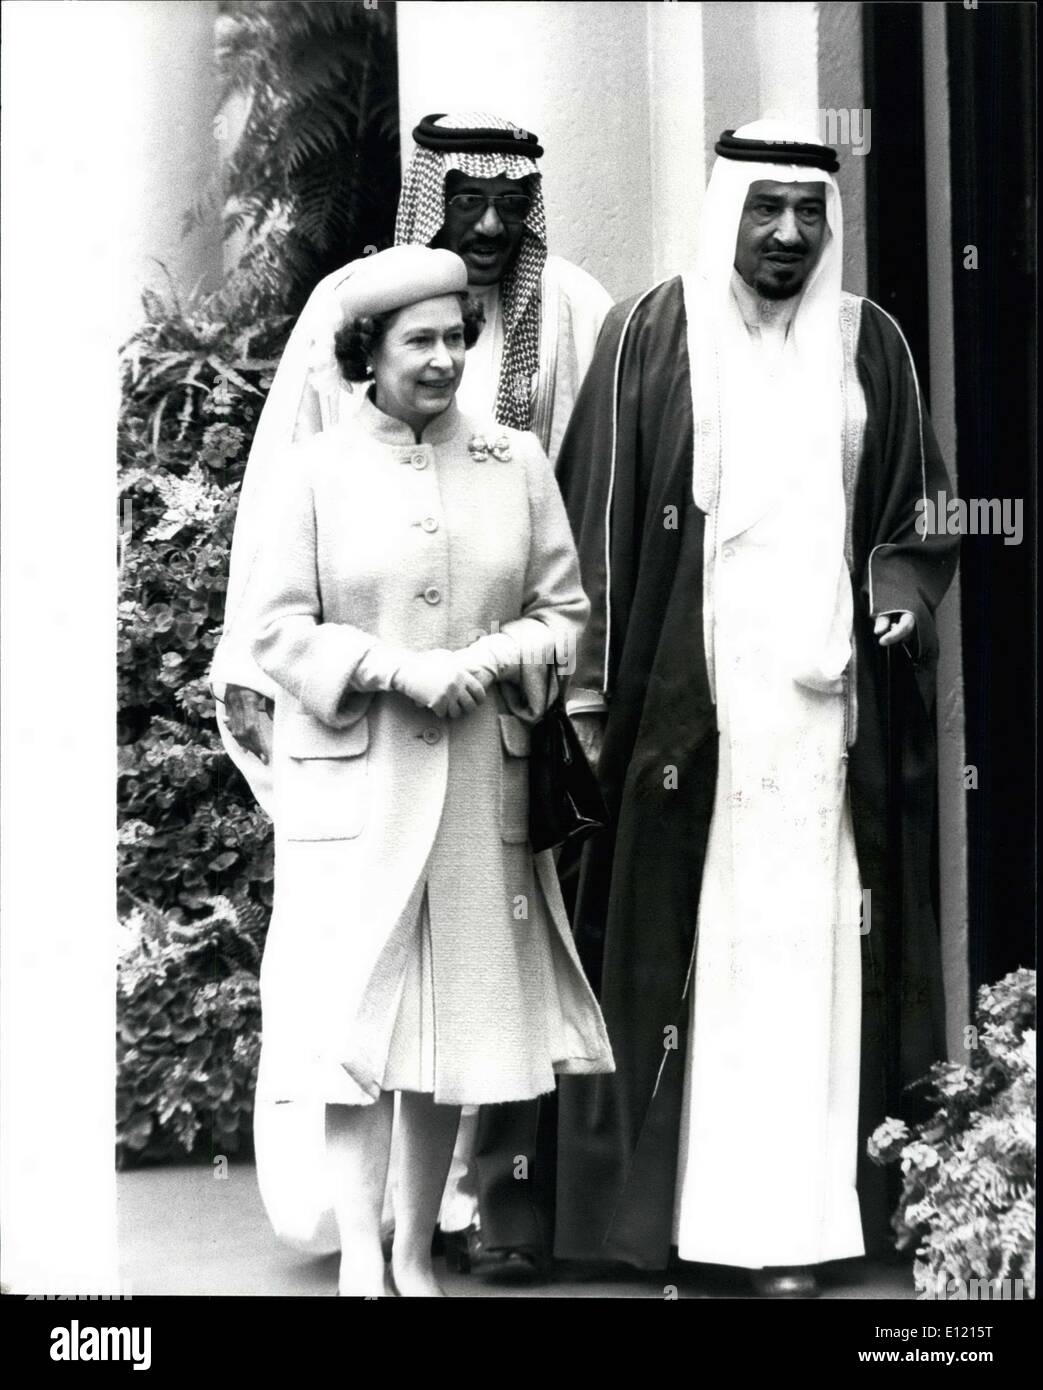 Jun. 09, 1981 - State Visit of King Khaled of Saudi Arabia: King Khaled of Saudi Arabia was welcomed at Victoria station today by the Queen and Prince Philip and other members of the royal Family, at the start of his three-day visit to Britain, tight security was in force owning to reports from the Middle-east of an assassination attempt made be made on him during his visit to London. Picture shows: King Khaled seen leaving the station with Queen Elizabeth after his arrival in London today. Stock Photo